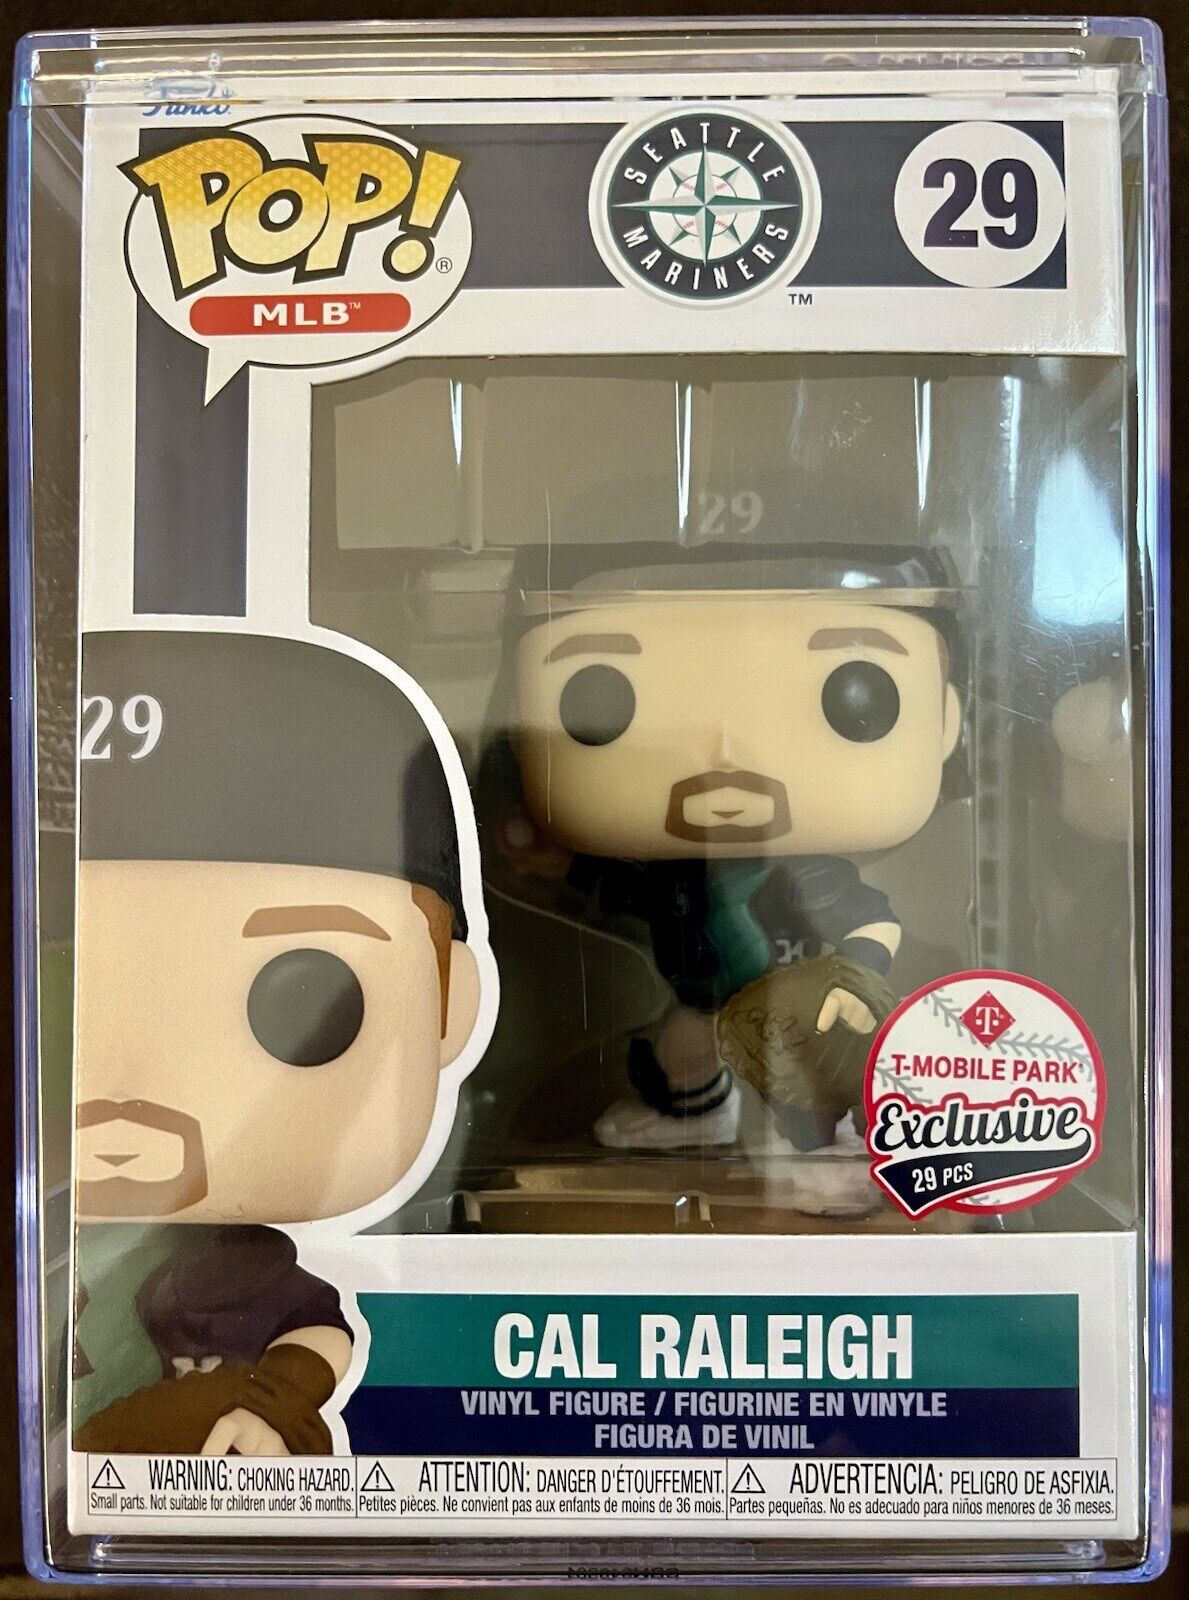 Cal Raleigh Rare Navy 29pcs Mariners Section Award Funko Pop (only 29 made)